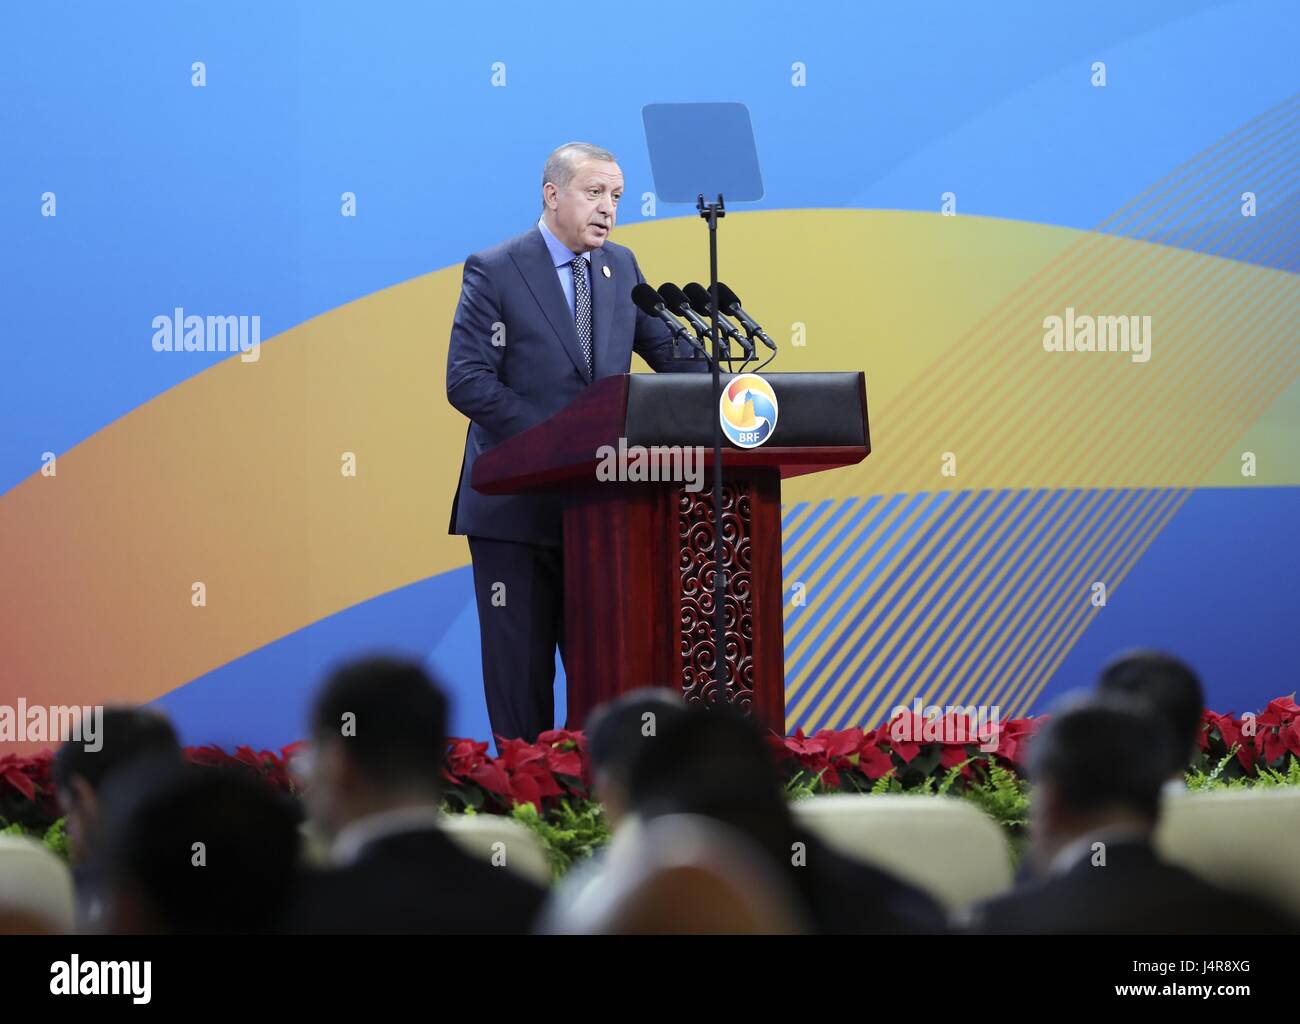 Beijing, China. 14th May, 2017. Turkish President Recep Tayyip Erdogan addresses the opening ceremony of the Belt and Road Forum for International Cooperation in Beijing, capital of China, May 14, 2017. Credit: Pang Xinglei/Xinhua/Alamy Live News Stock Photo